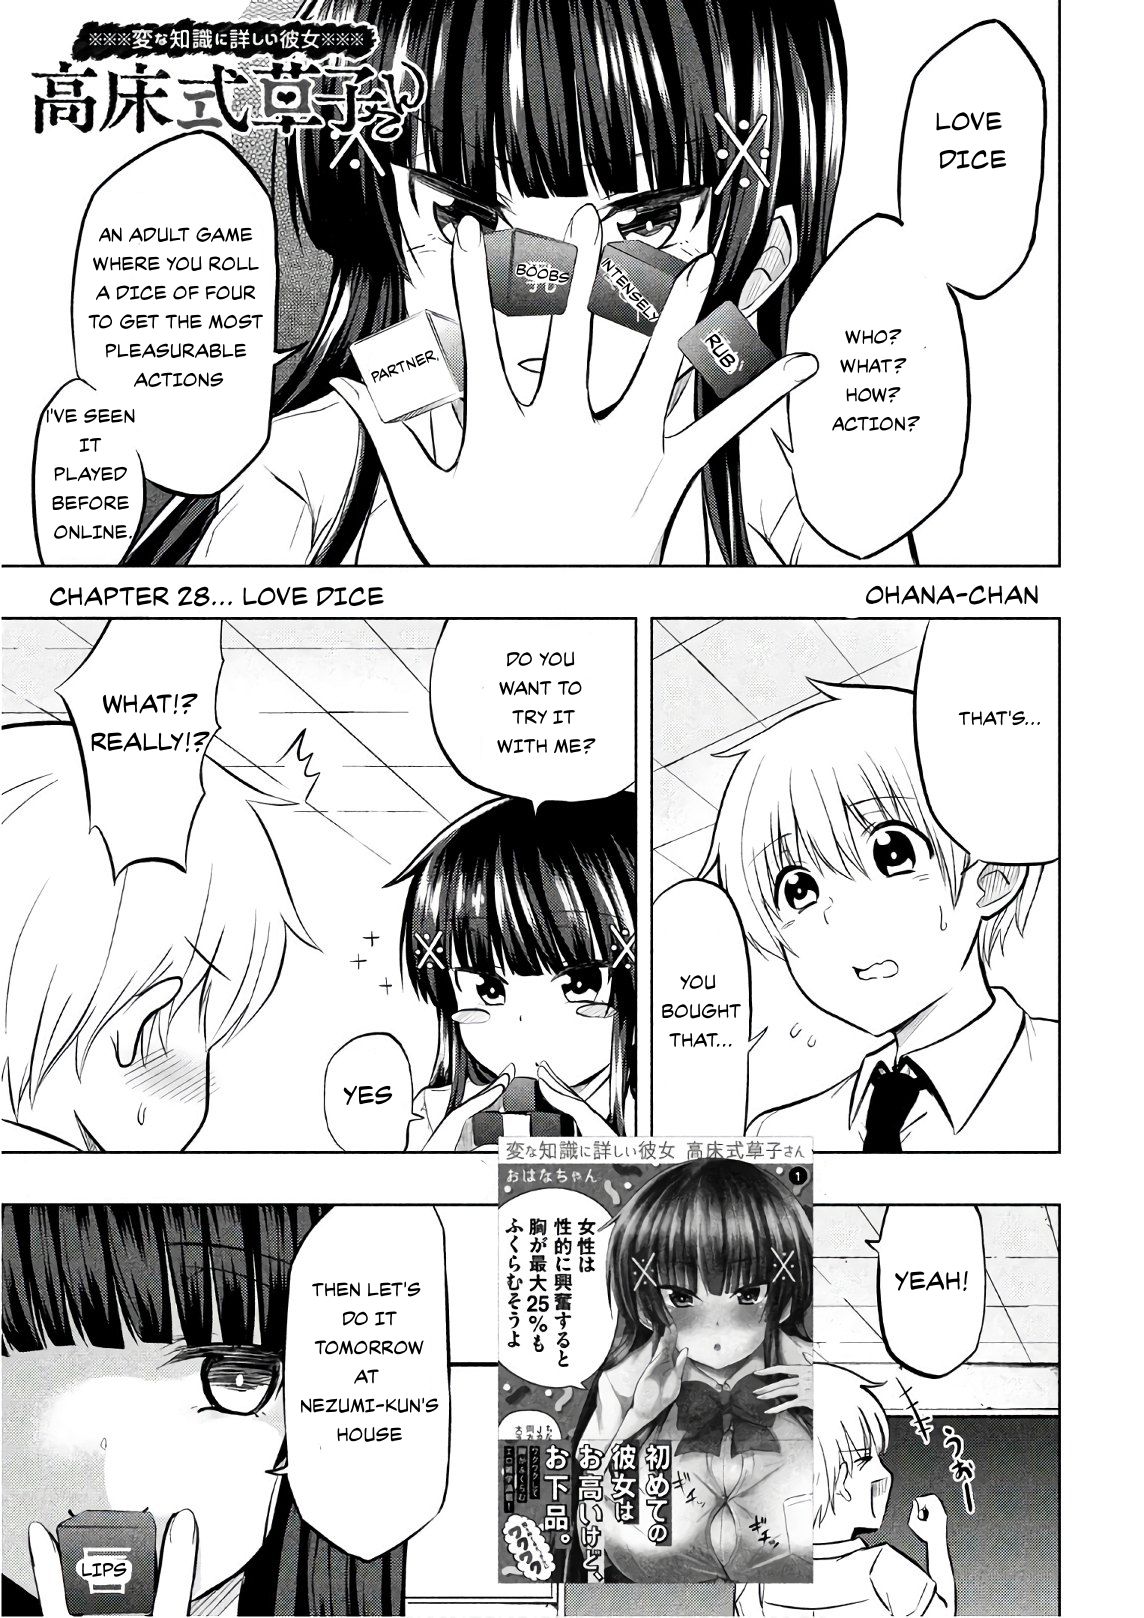 A Girl Who Is Very Well-Informed About Weird Knowledge, Takayukashiki Souko-San - Page 1